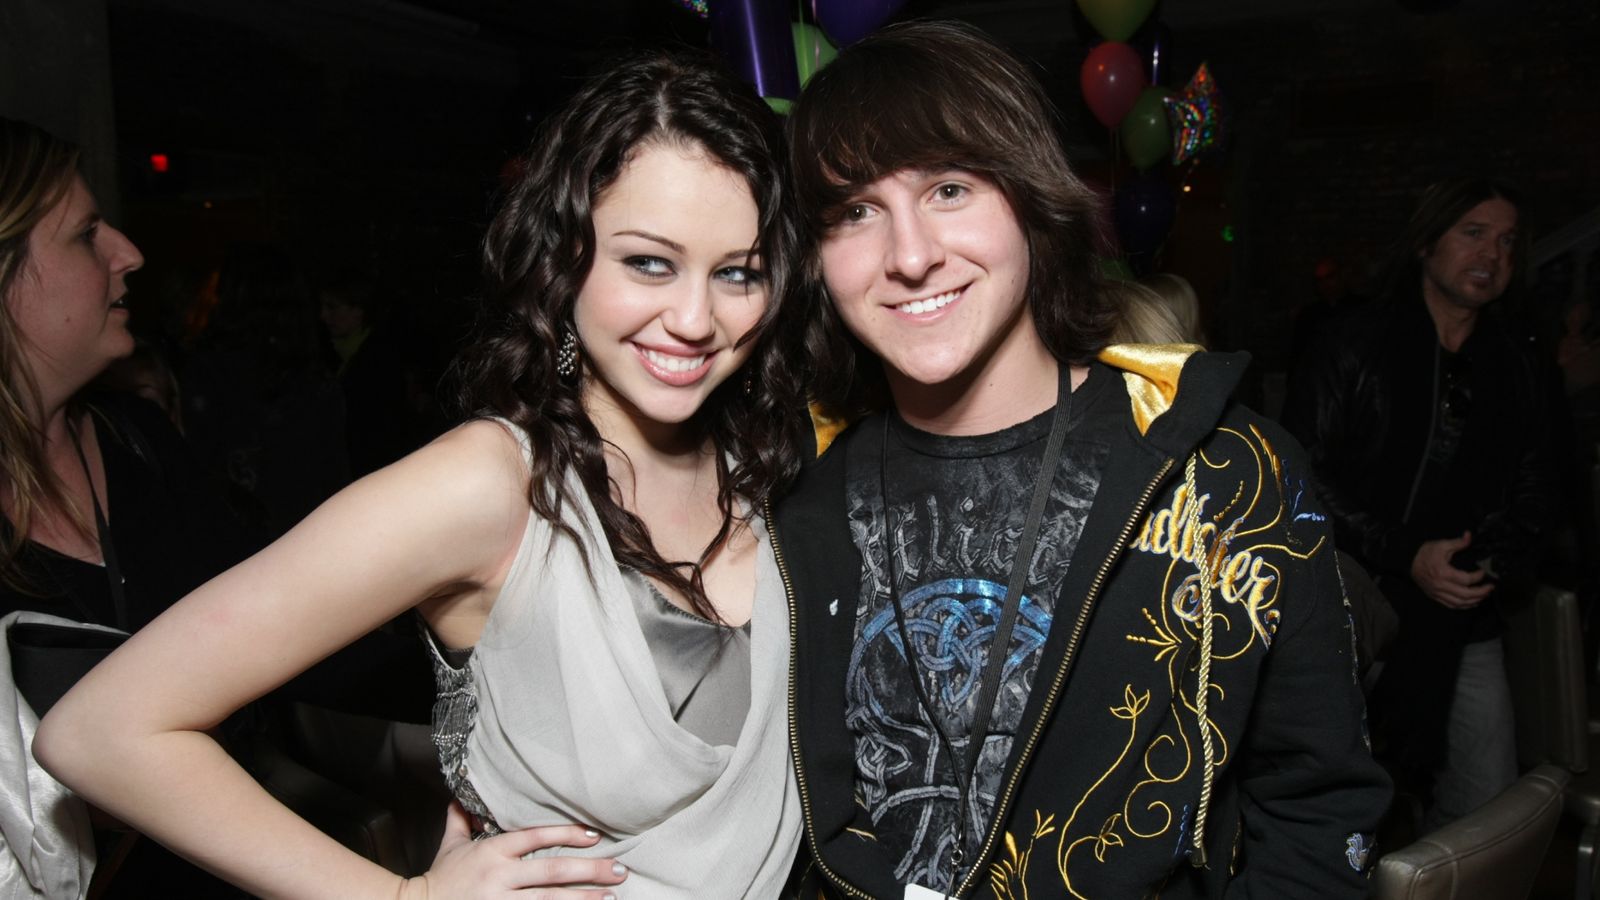 Hannah Montana star Mitchel Musso charged with theft and public intoxication